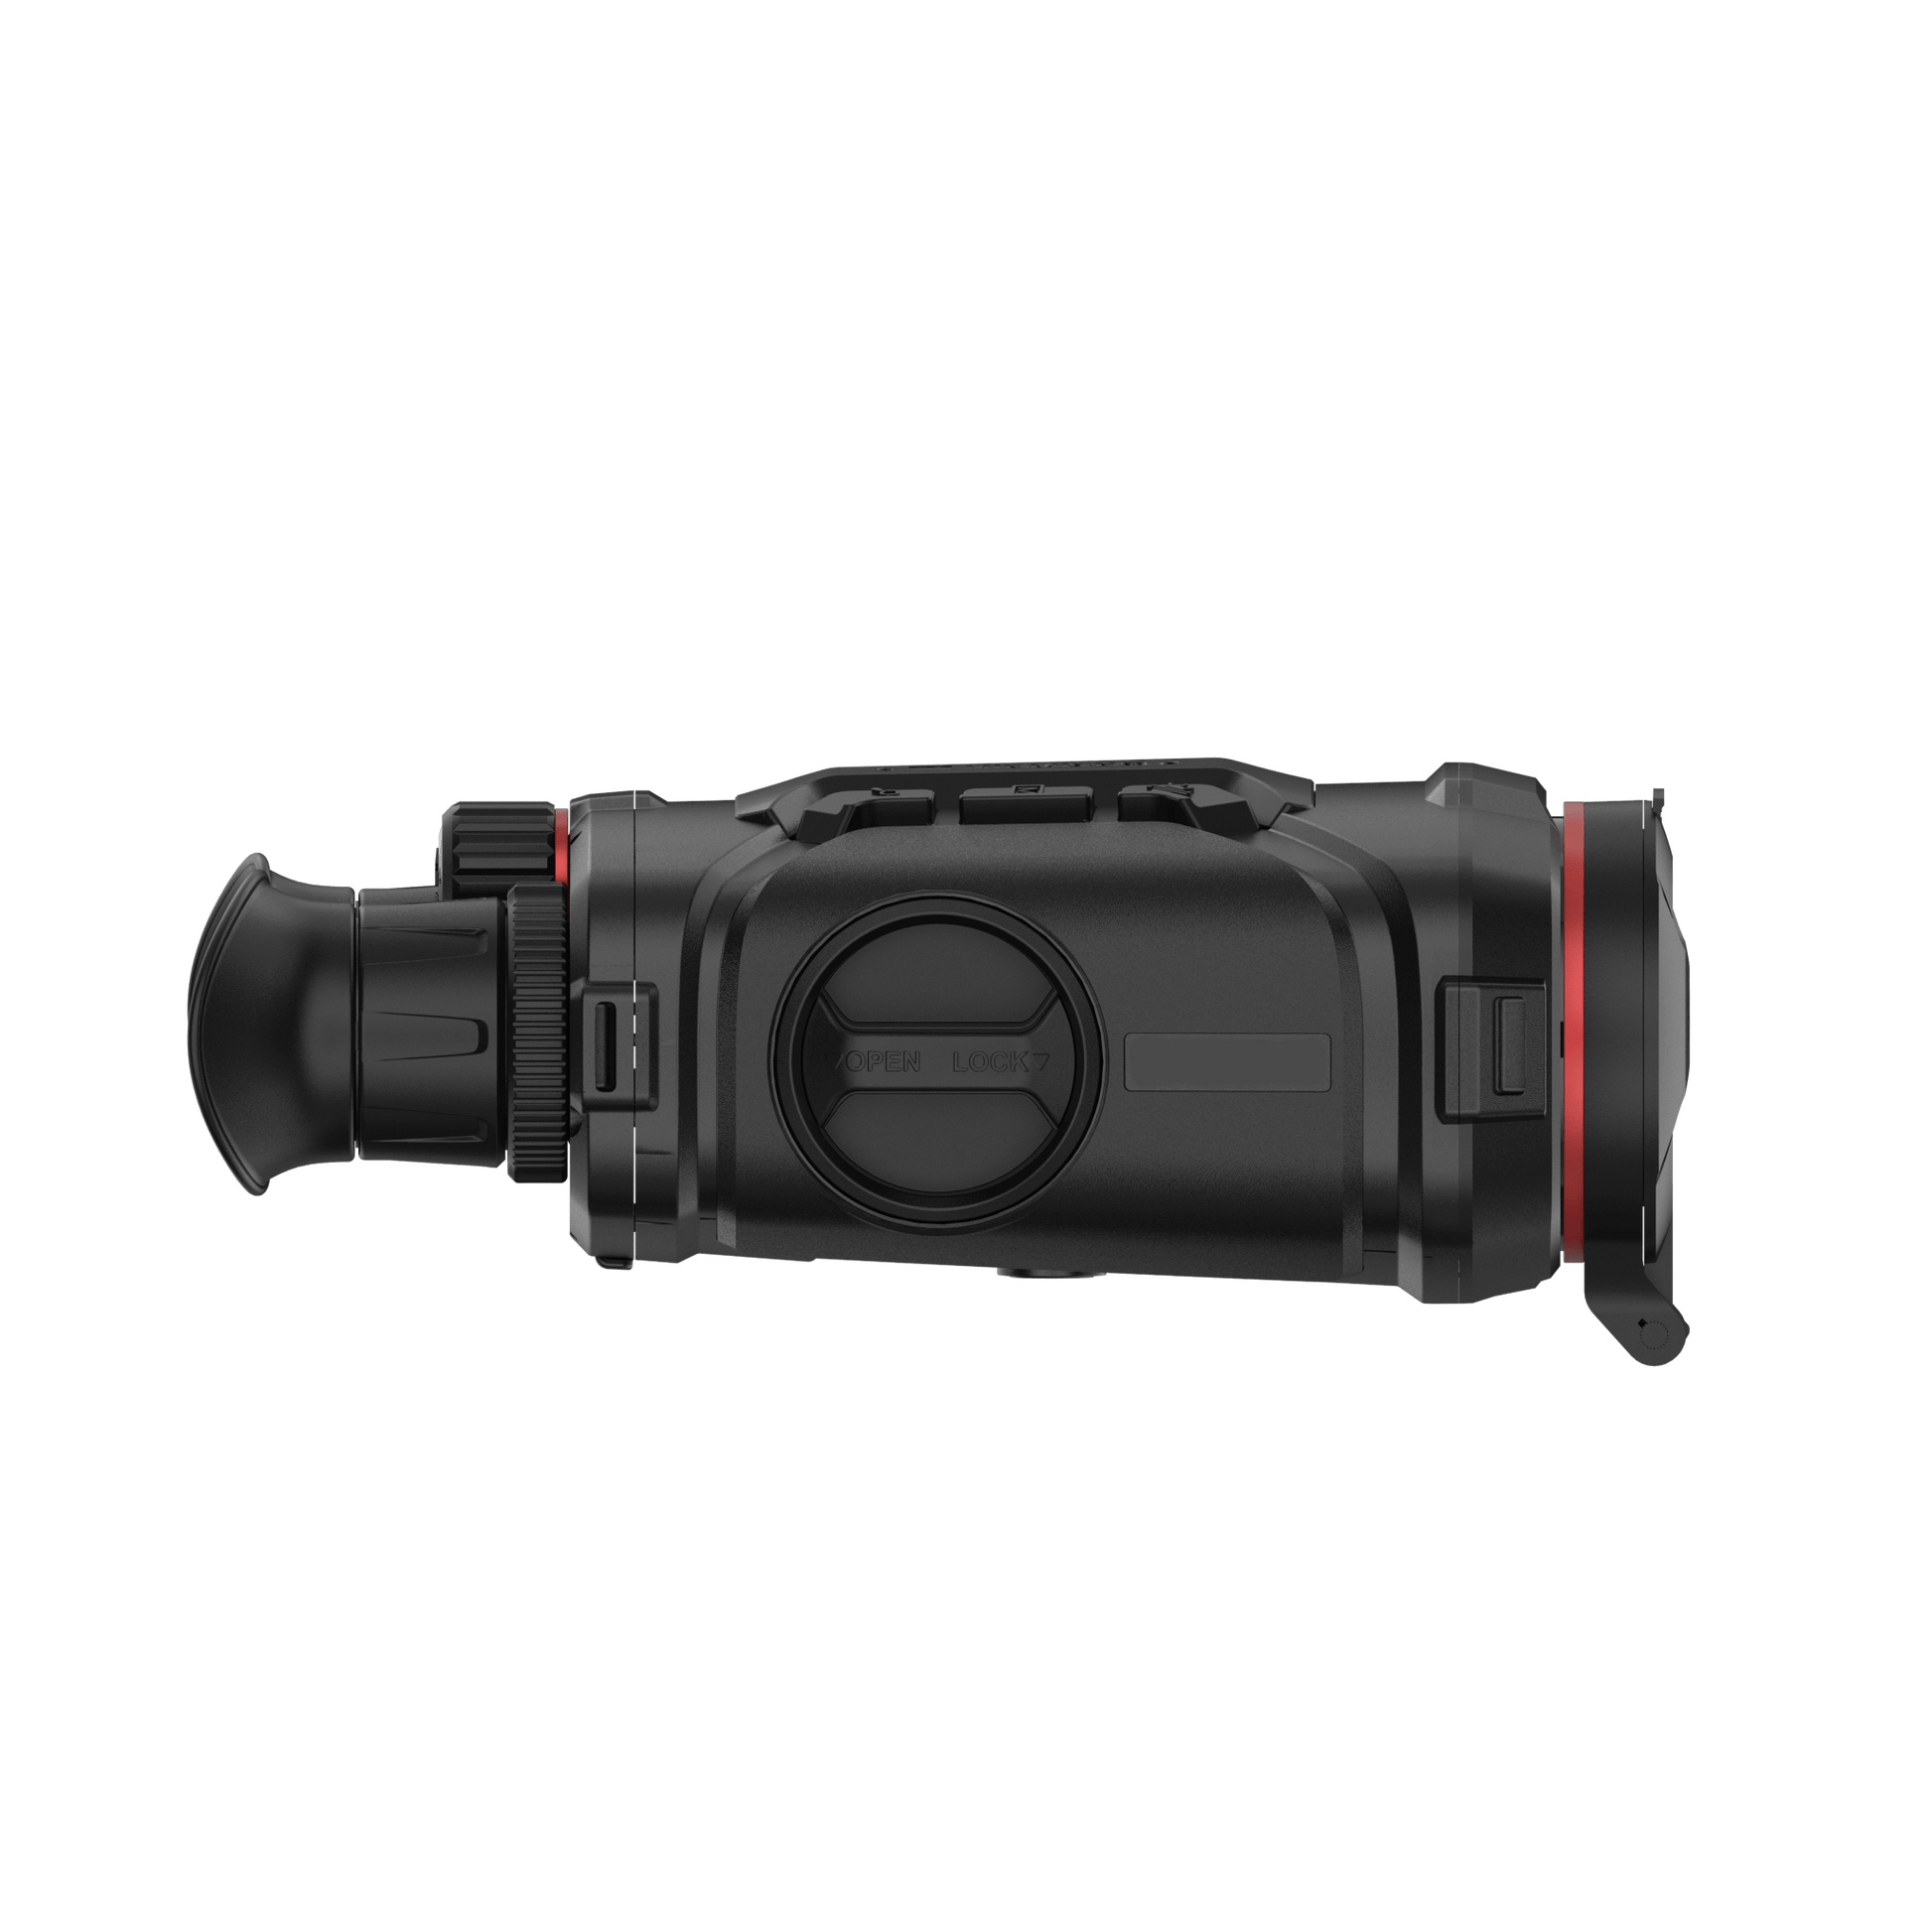 HikMicro Raptor RH50 handheld thermal binocular with infrared and optical capabilities - Right Side View